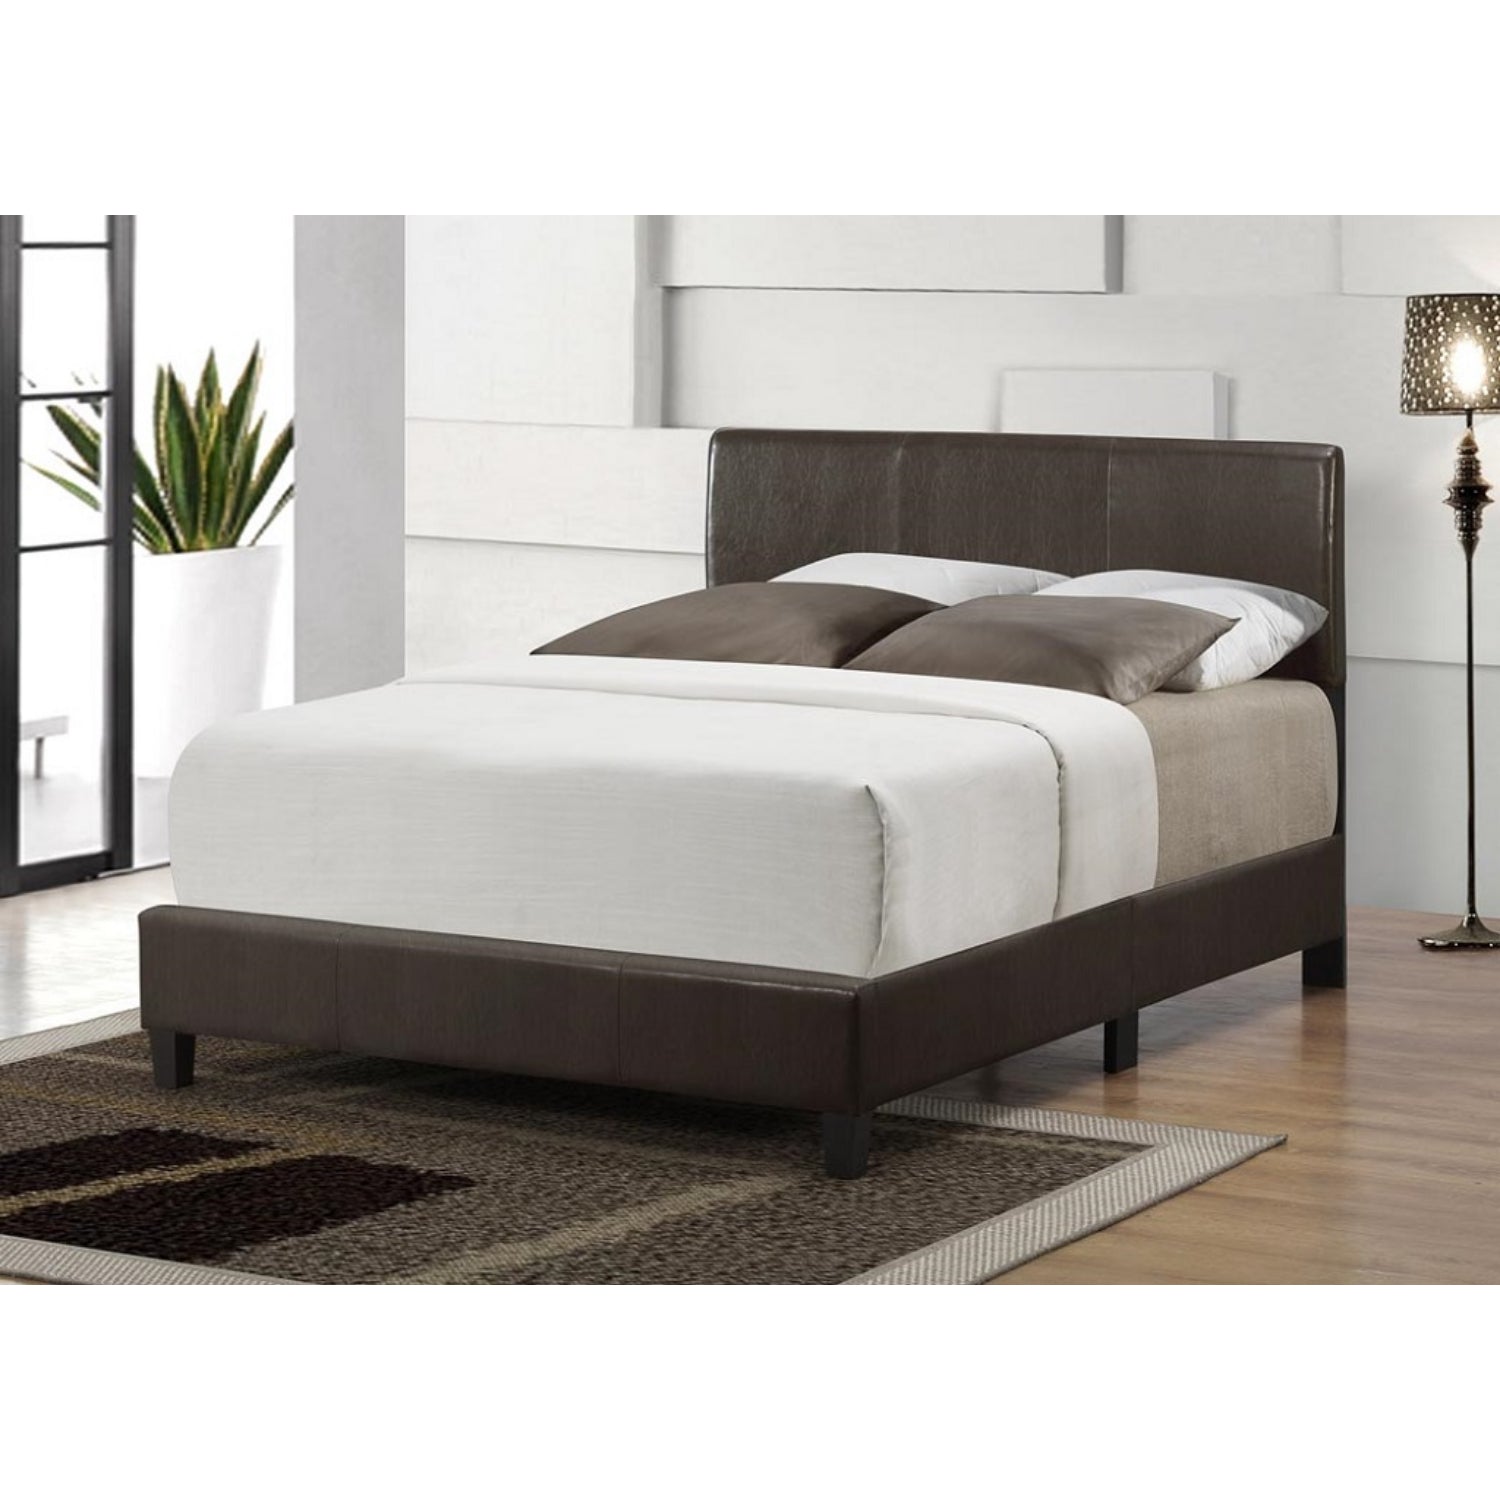 ViscoLogic LUCA Platform Bed with Faux Leather Headboard/Footboard and Rails